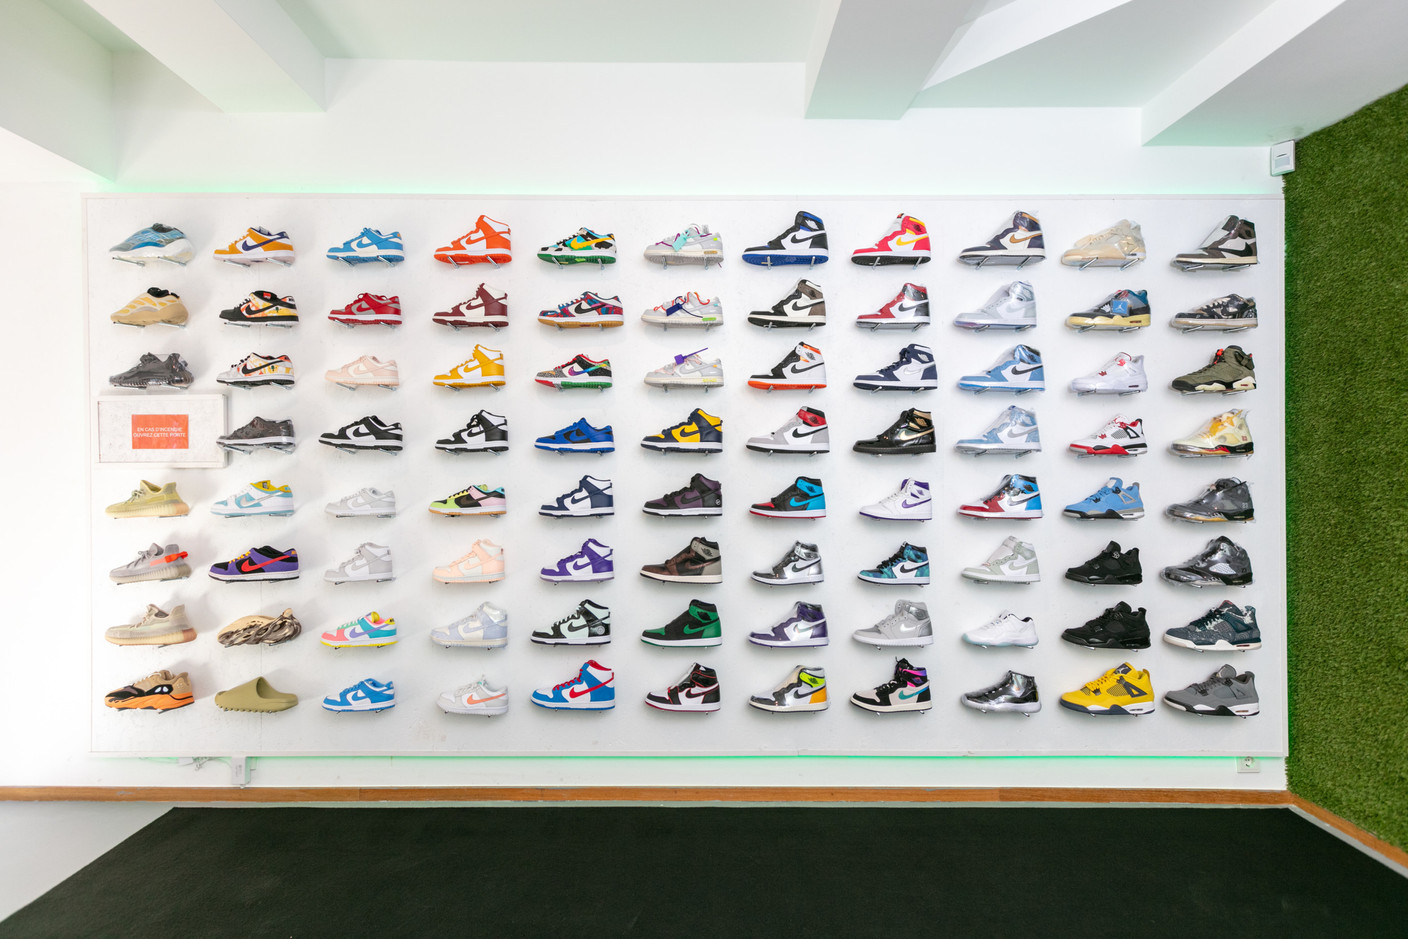 A department with Nike Dunk, Air Jordan 4, Yeezy and others. (Photo: Romain Gamba / Maison Moderne)